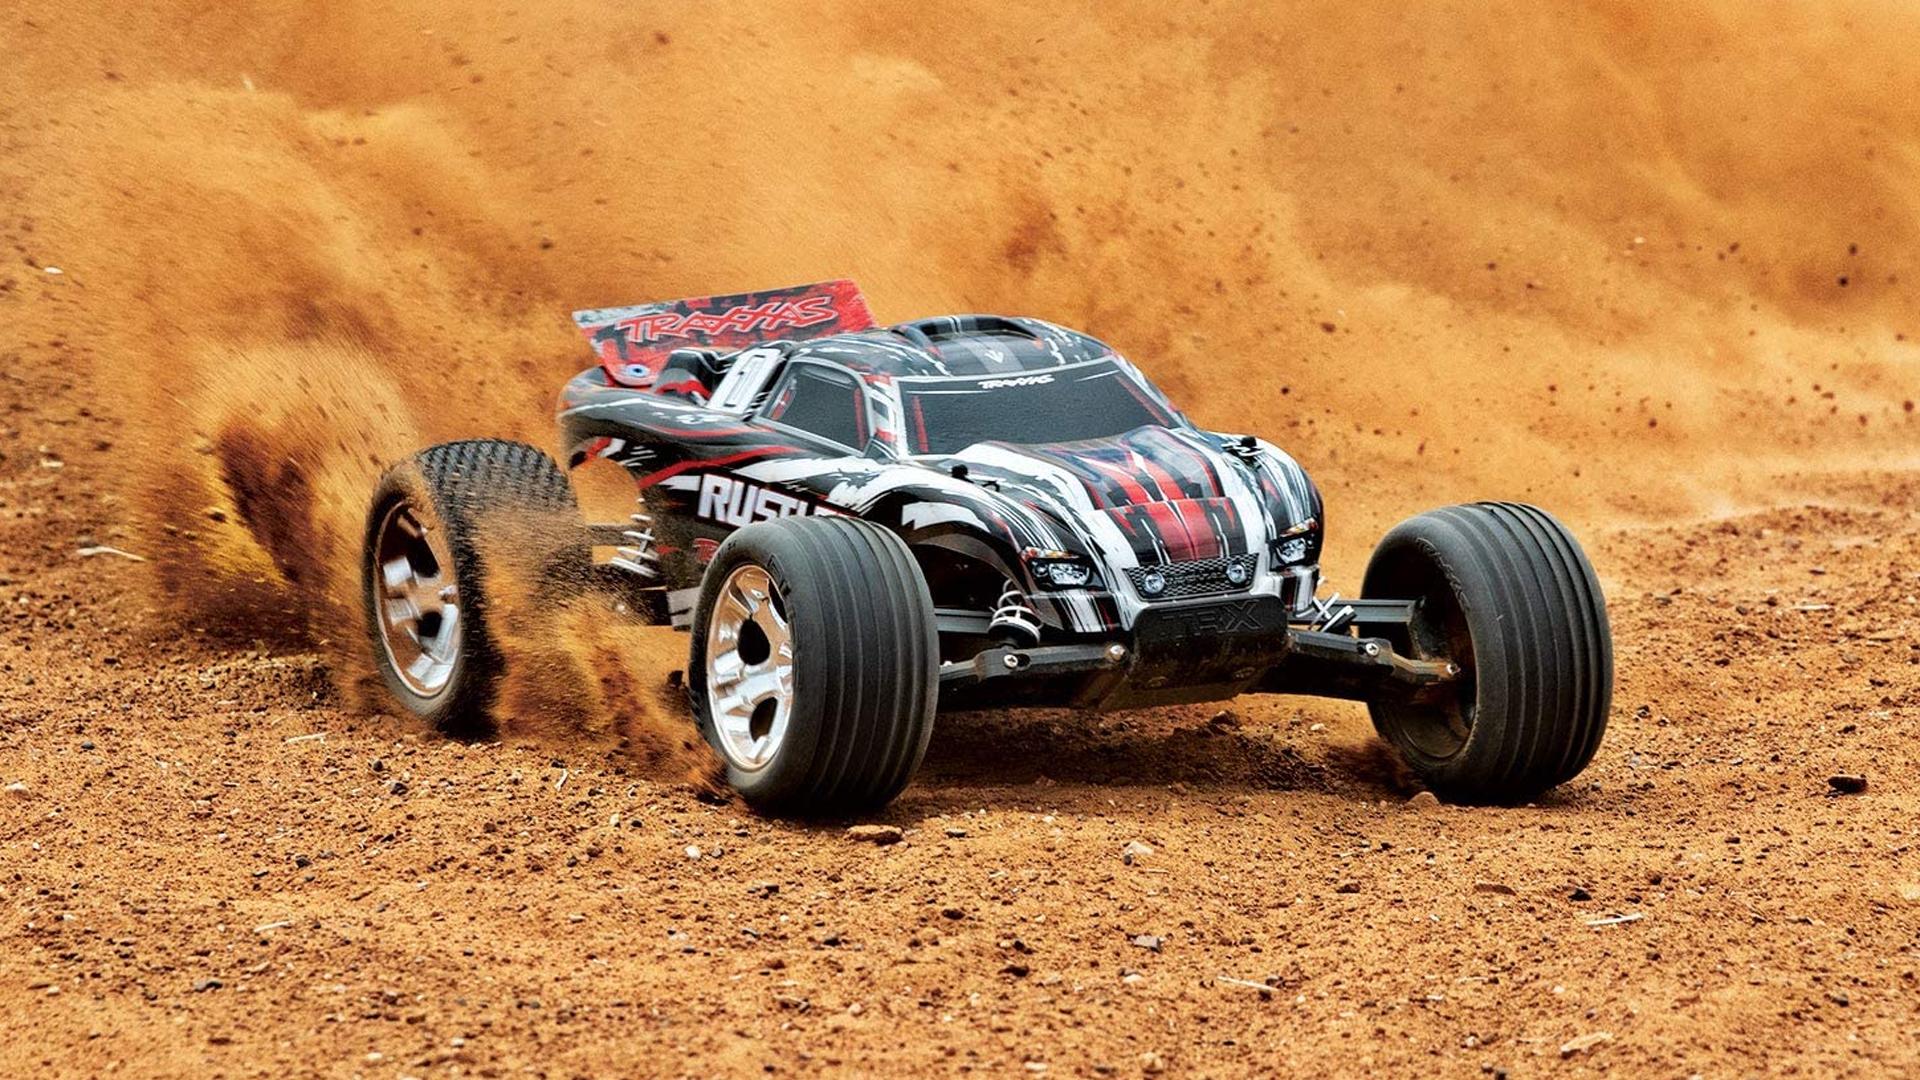 Ford Rc Car: Affordable high-performance remote-controlled car